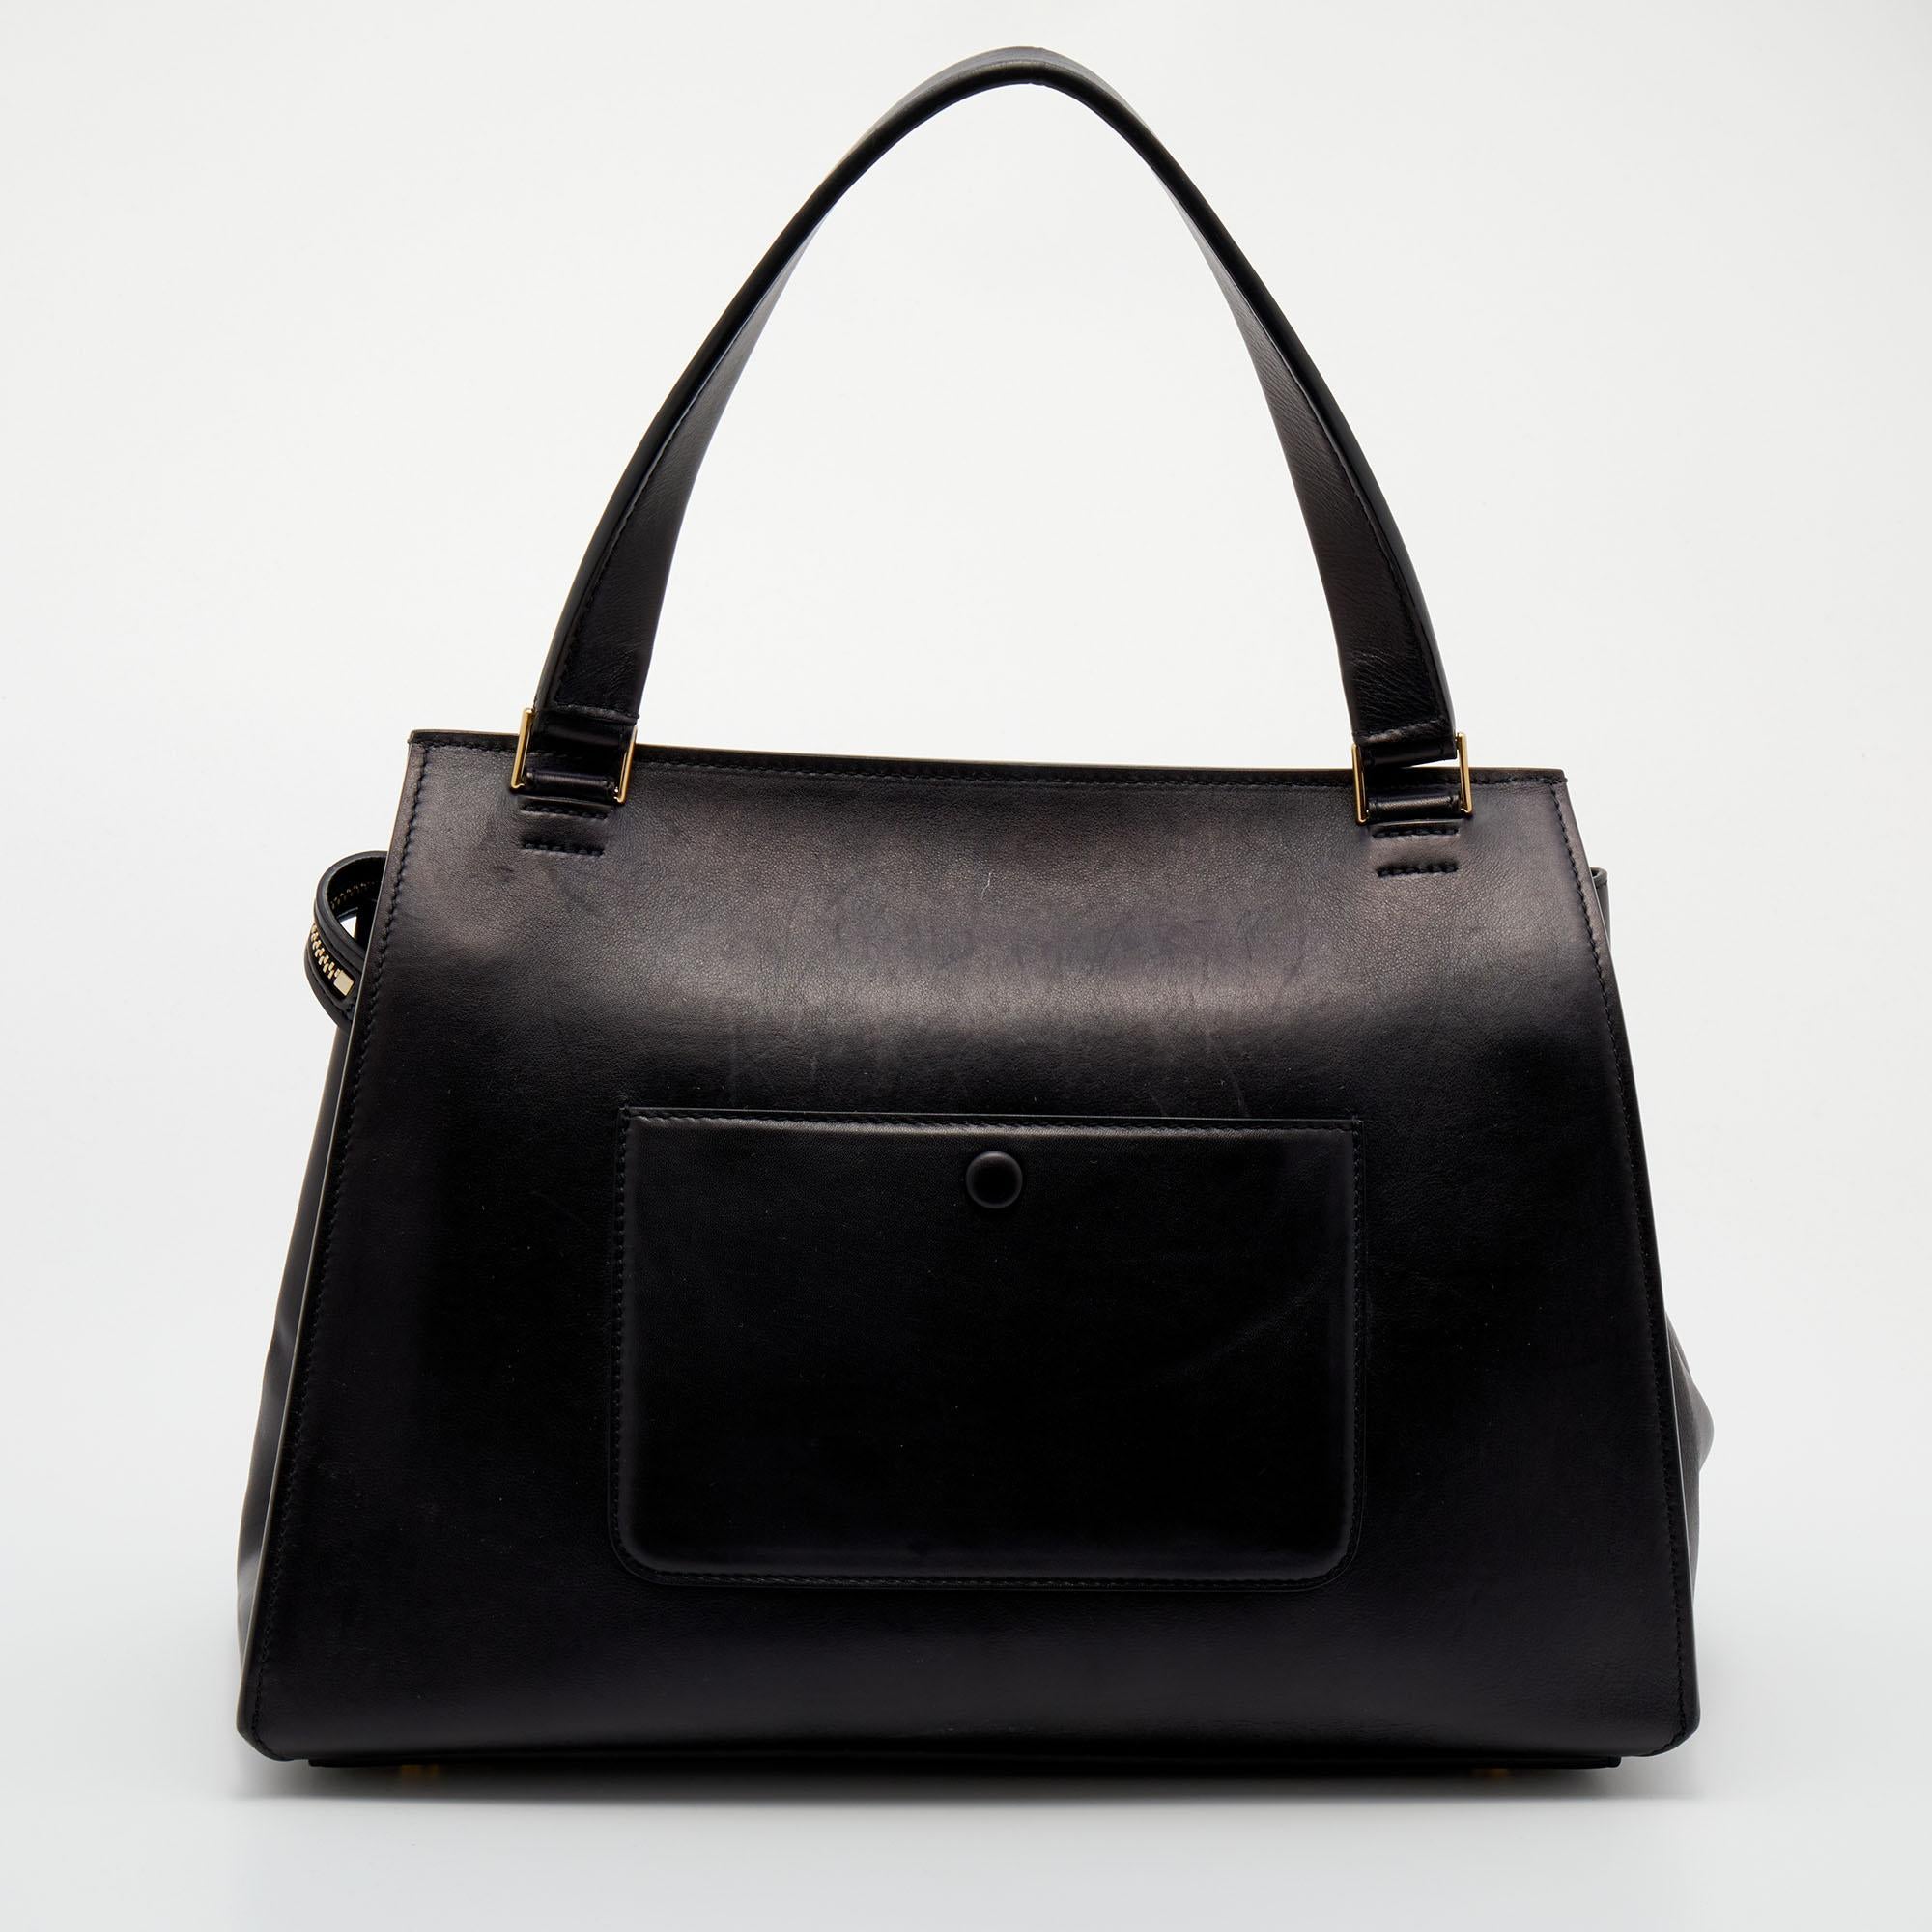 This Edge bag from the House of Celine exudes the right amount of class and style. Crafted from black-beige leather, this bag is adorned with a top handle and gold-tone hardware. It accommodates a leather-lined interior. Make this classy Celine bag